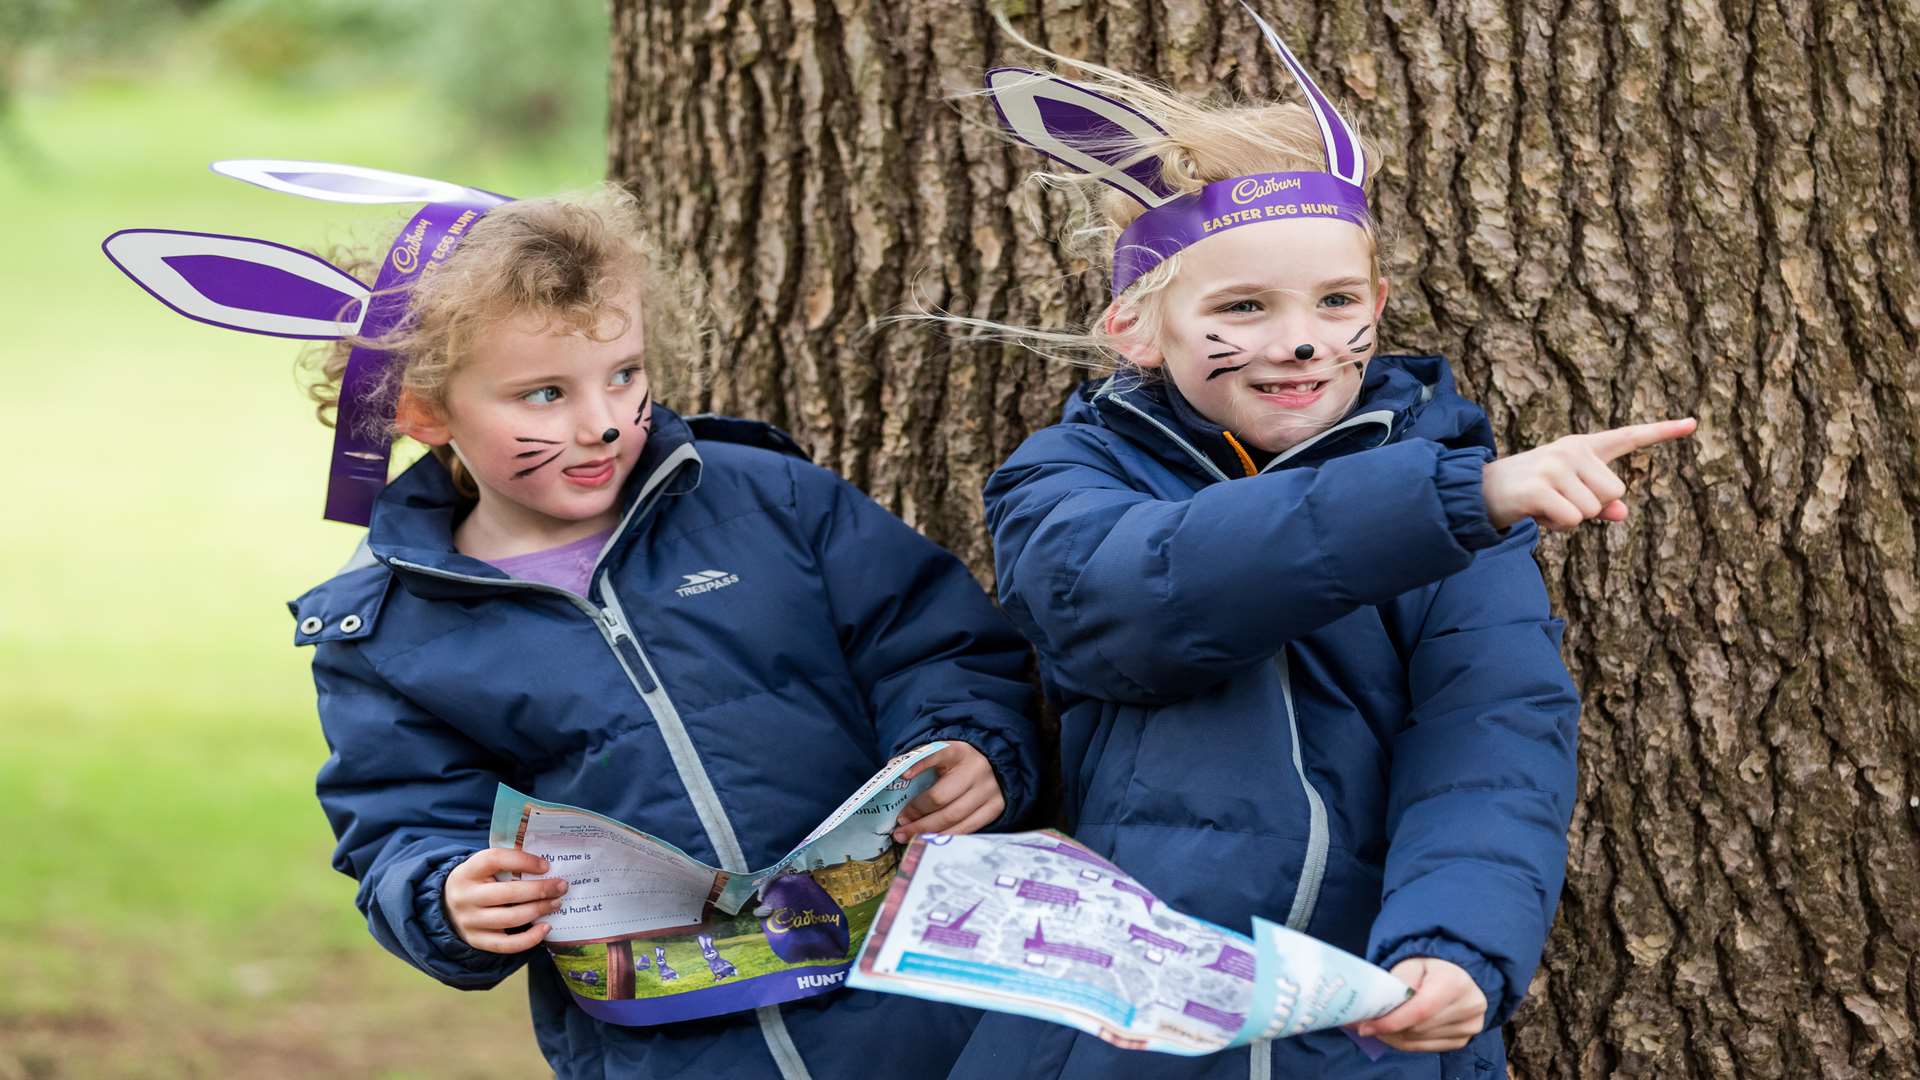 Look out for a Cadbury egg hunt near you in Kent